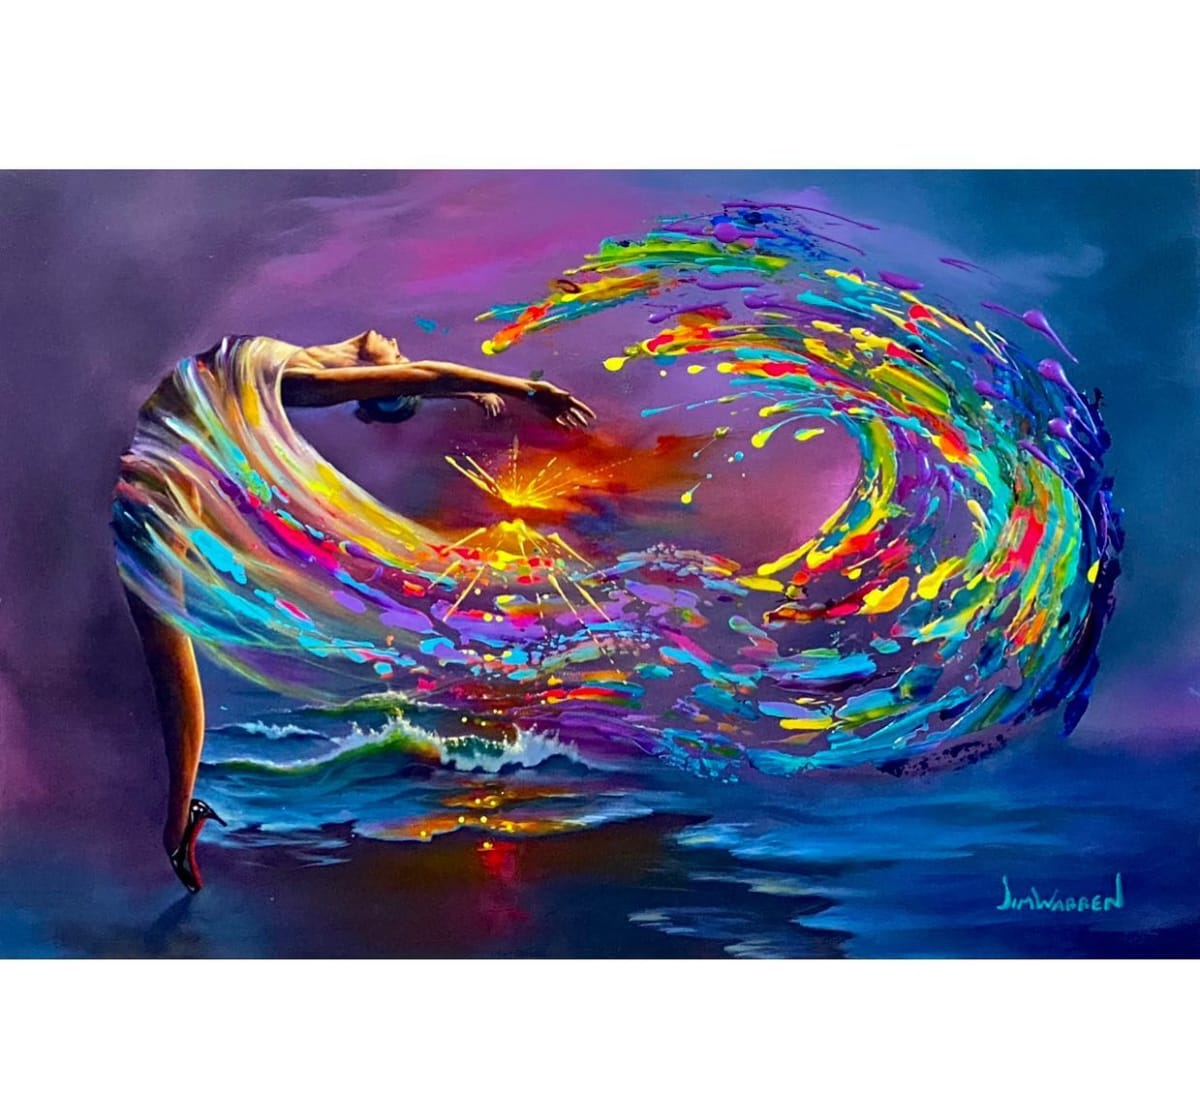 Dreaming while Dancing by Jim Warren  Image: Dreaming while Dancing